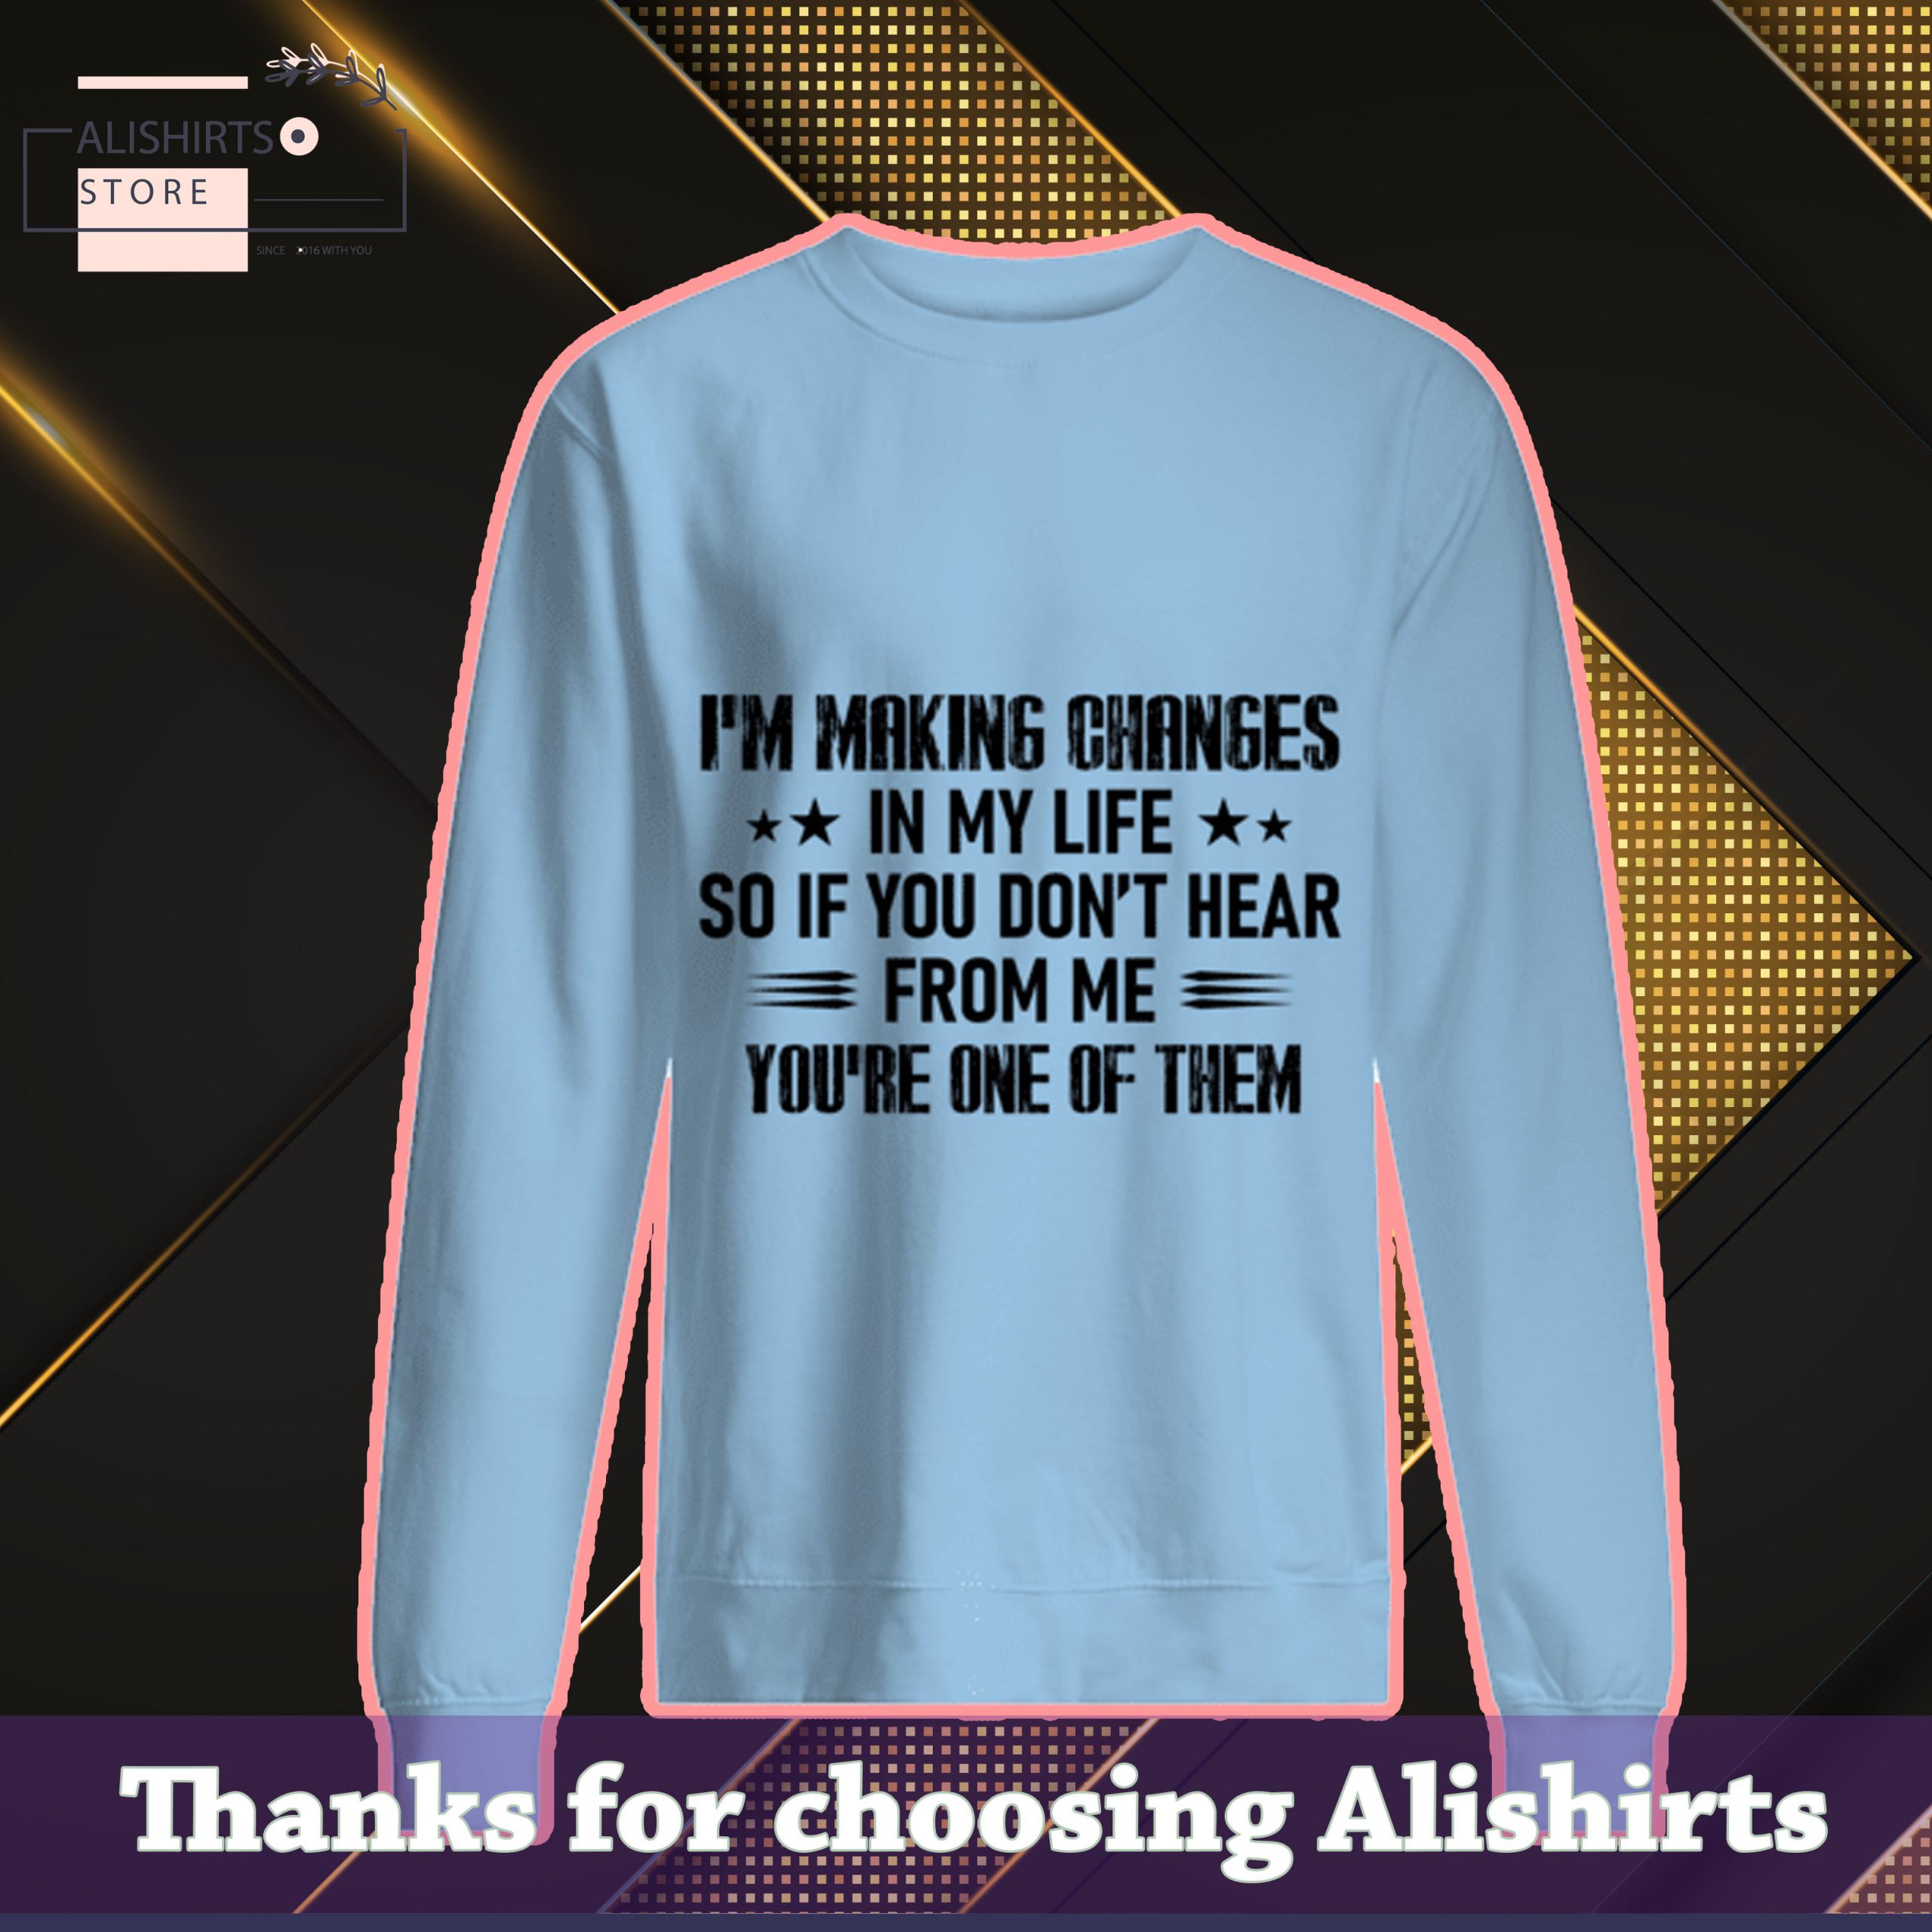 Im making changes in my life so if you dont hear from me you are one of them shirt